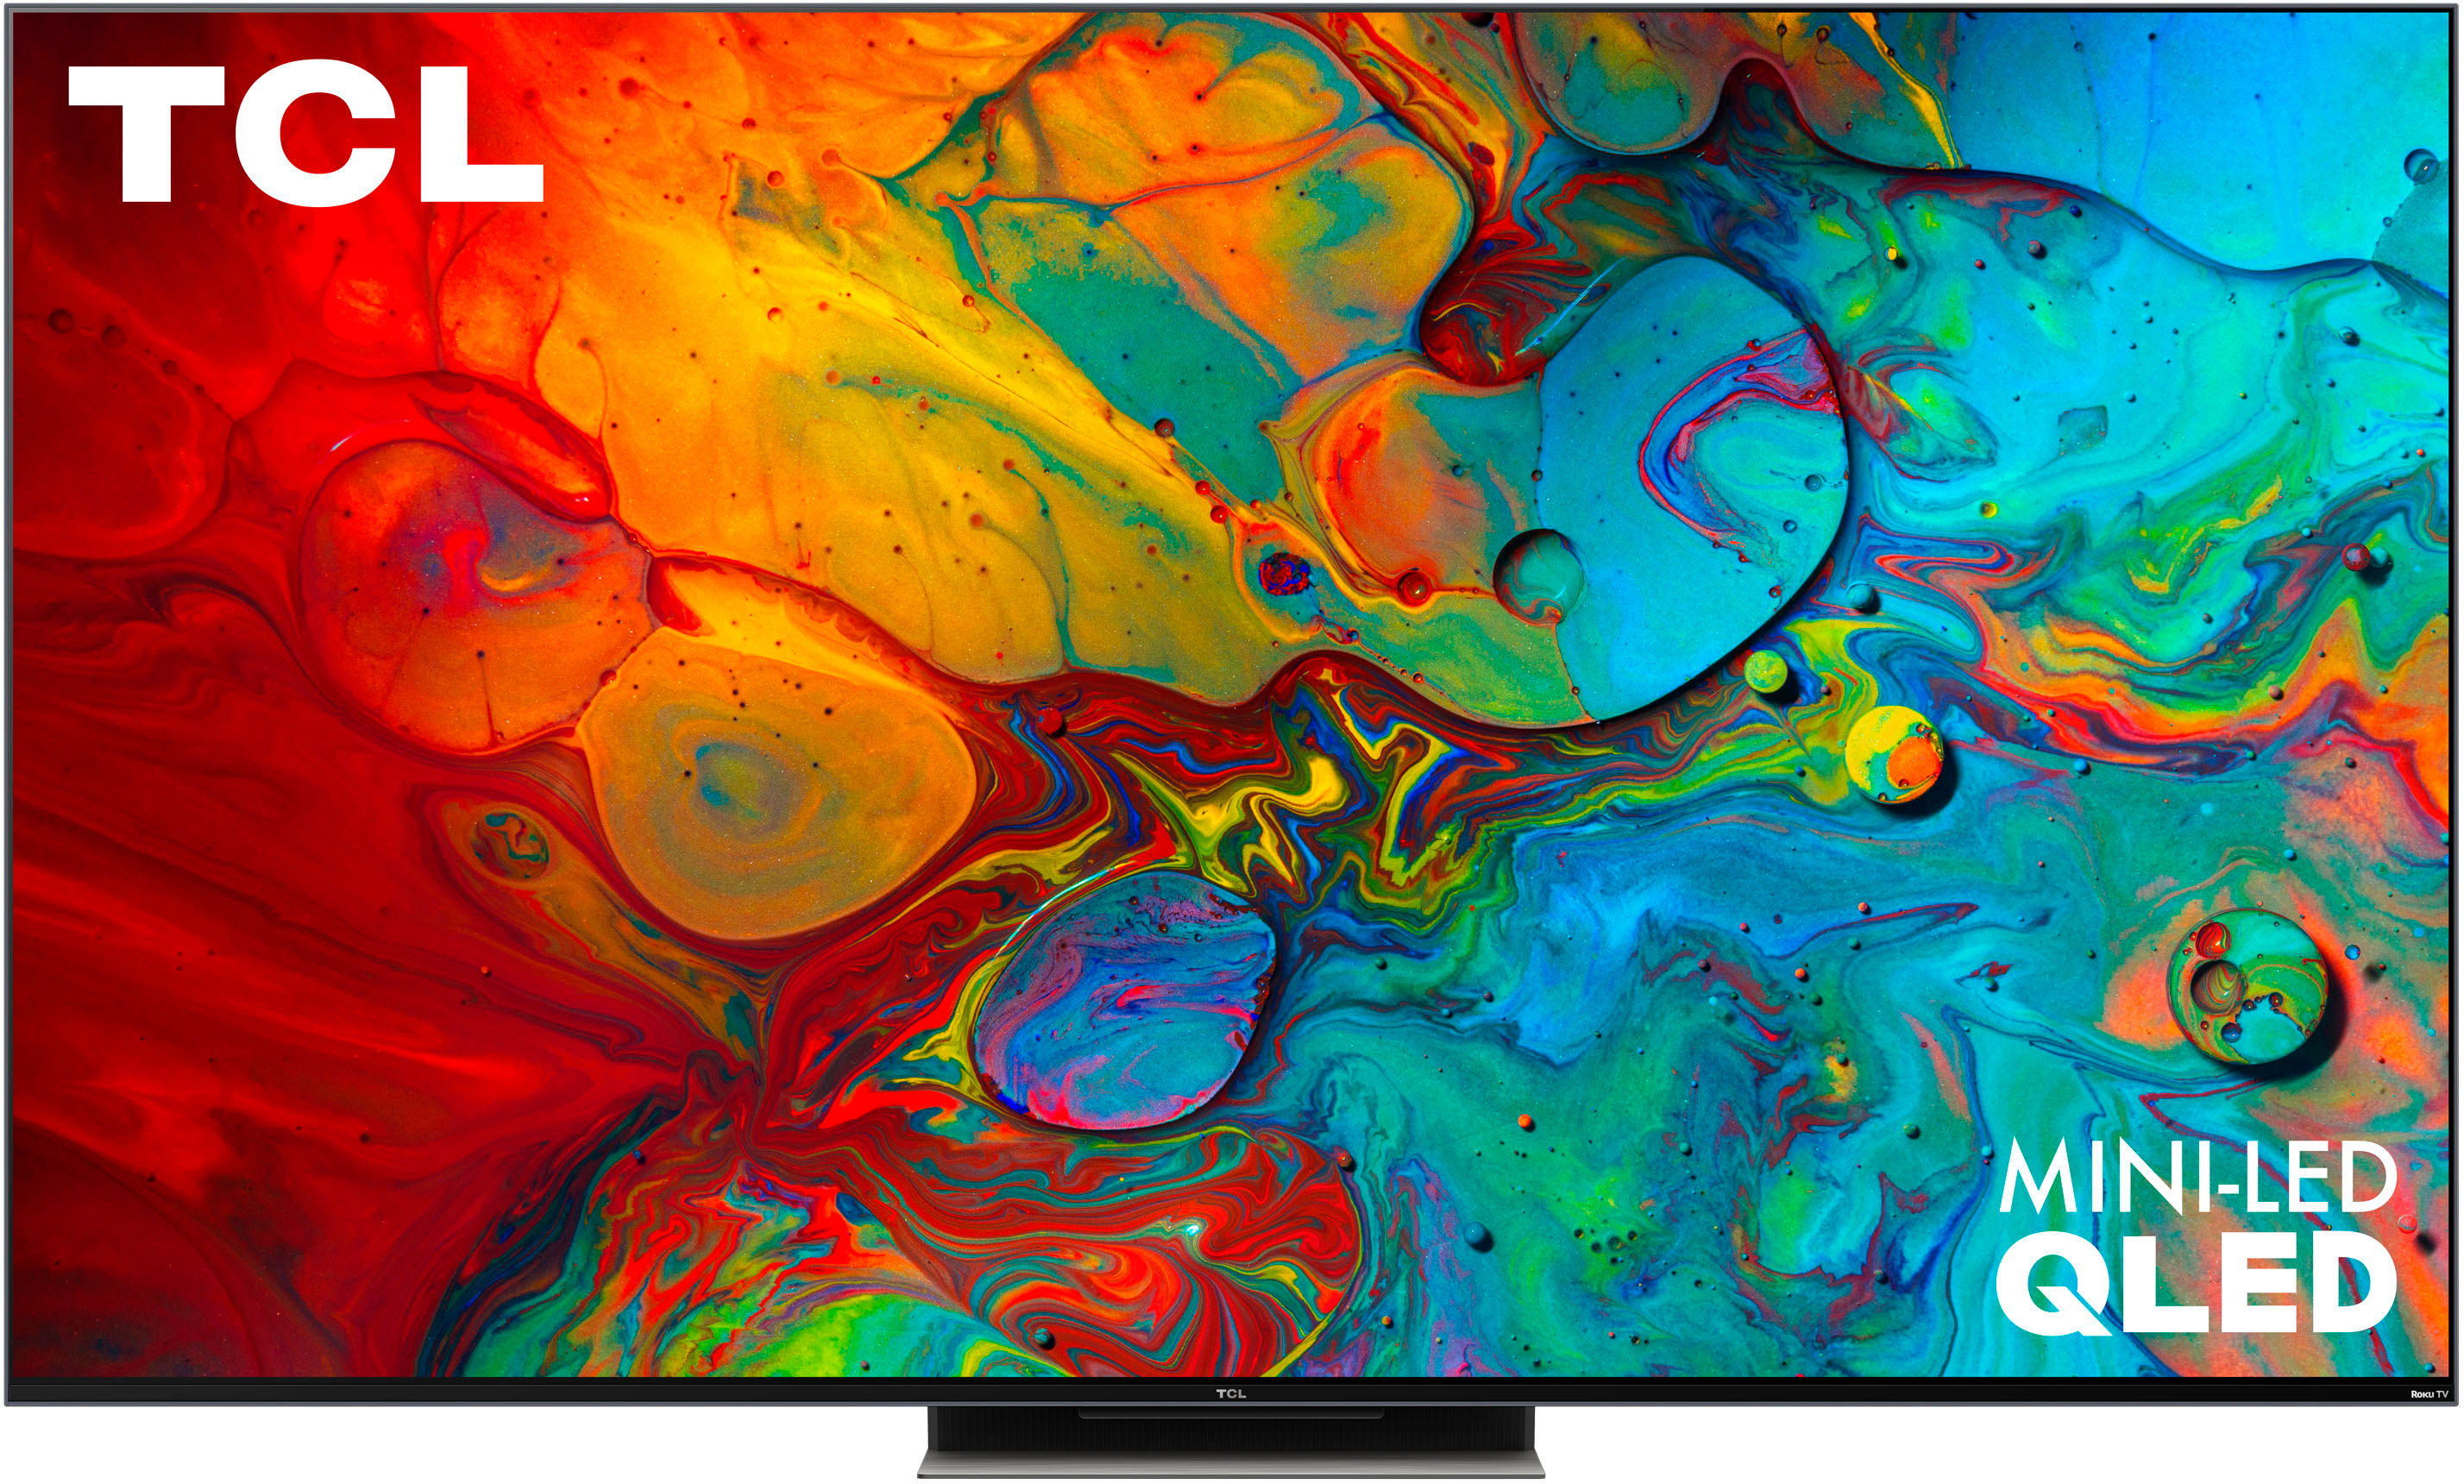 New Xiaomi TV S Pro cheaper 4K Mini LED model with 144Hz refresh rate  arrives -  News